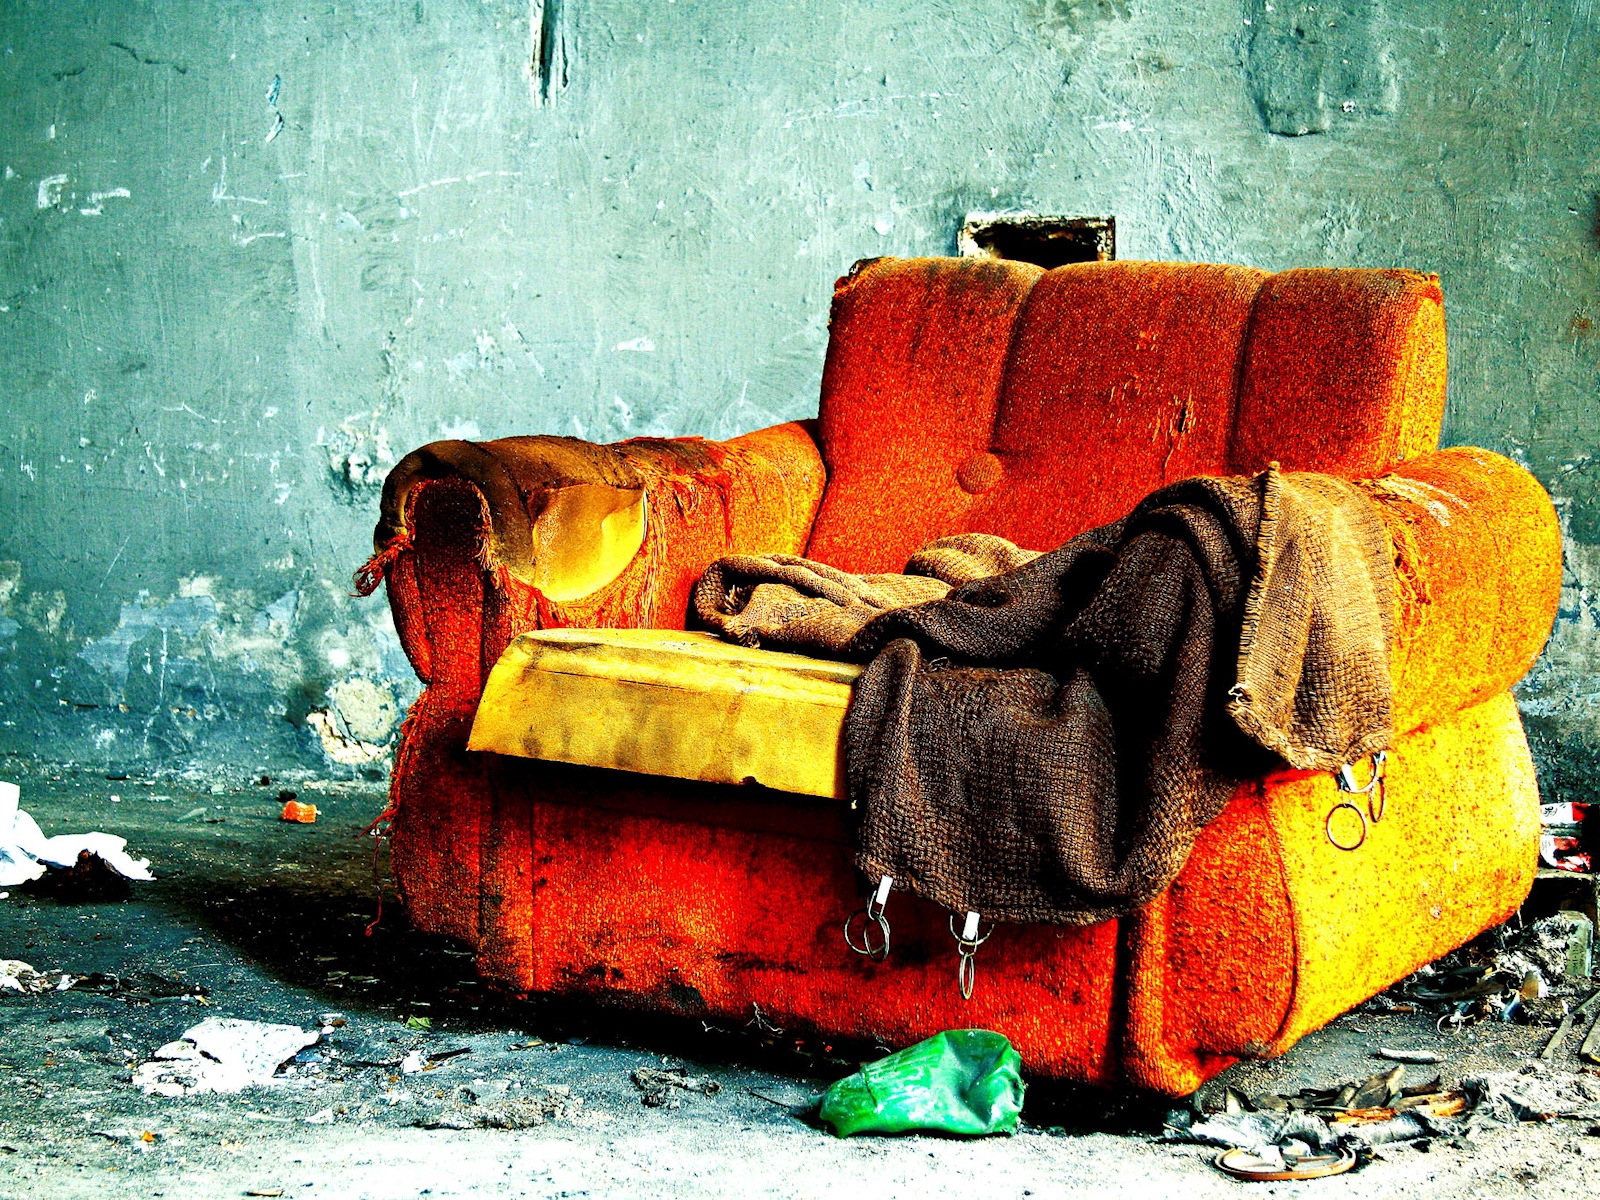 colourful, miscellanea, miscellaneous, old, colorful, armchair, ancient, ragged phone wallpaper